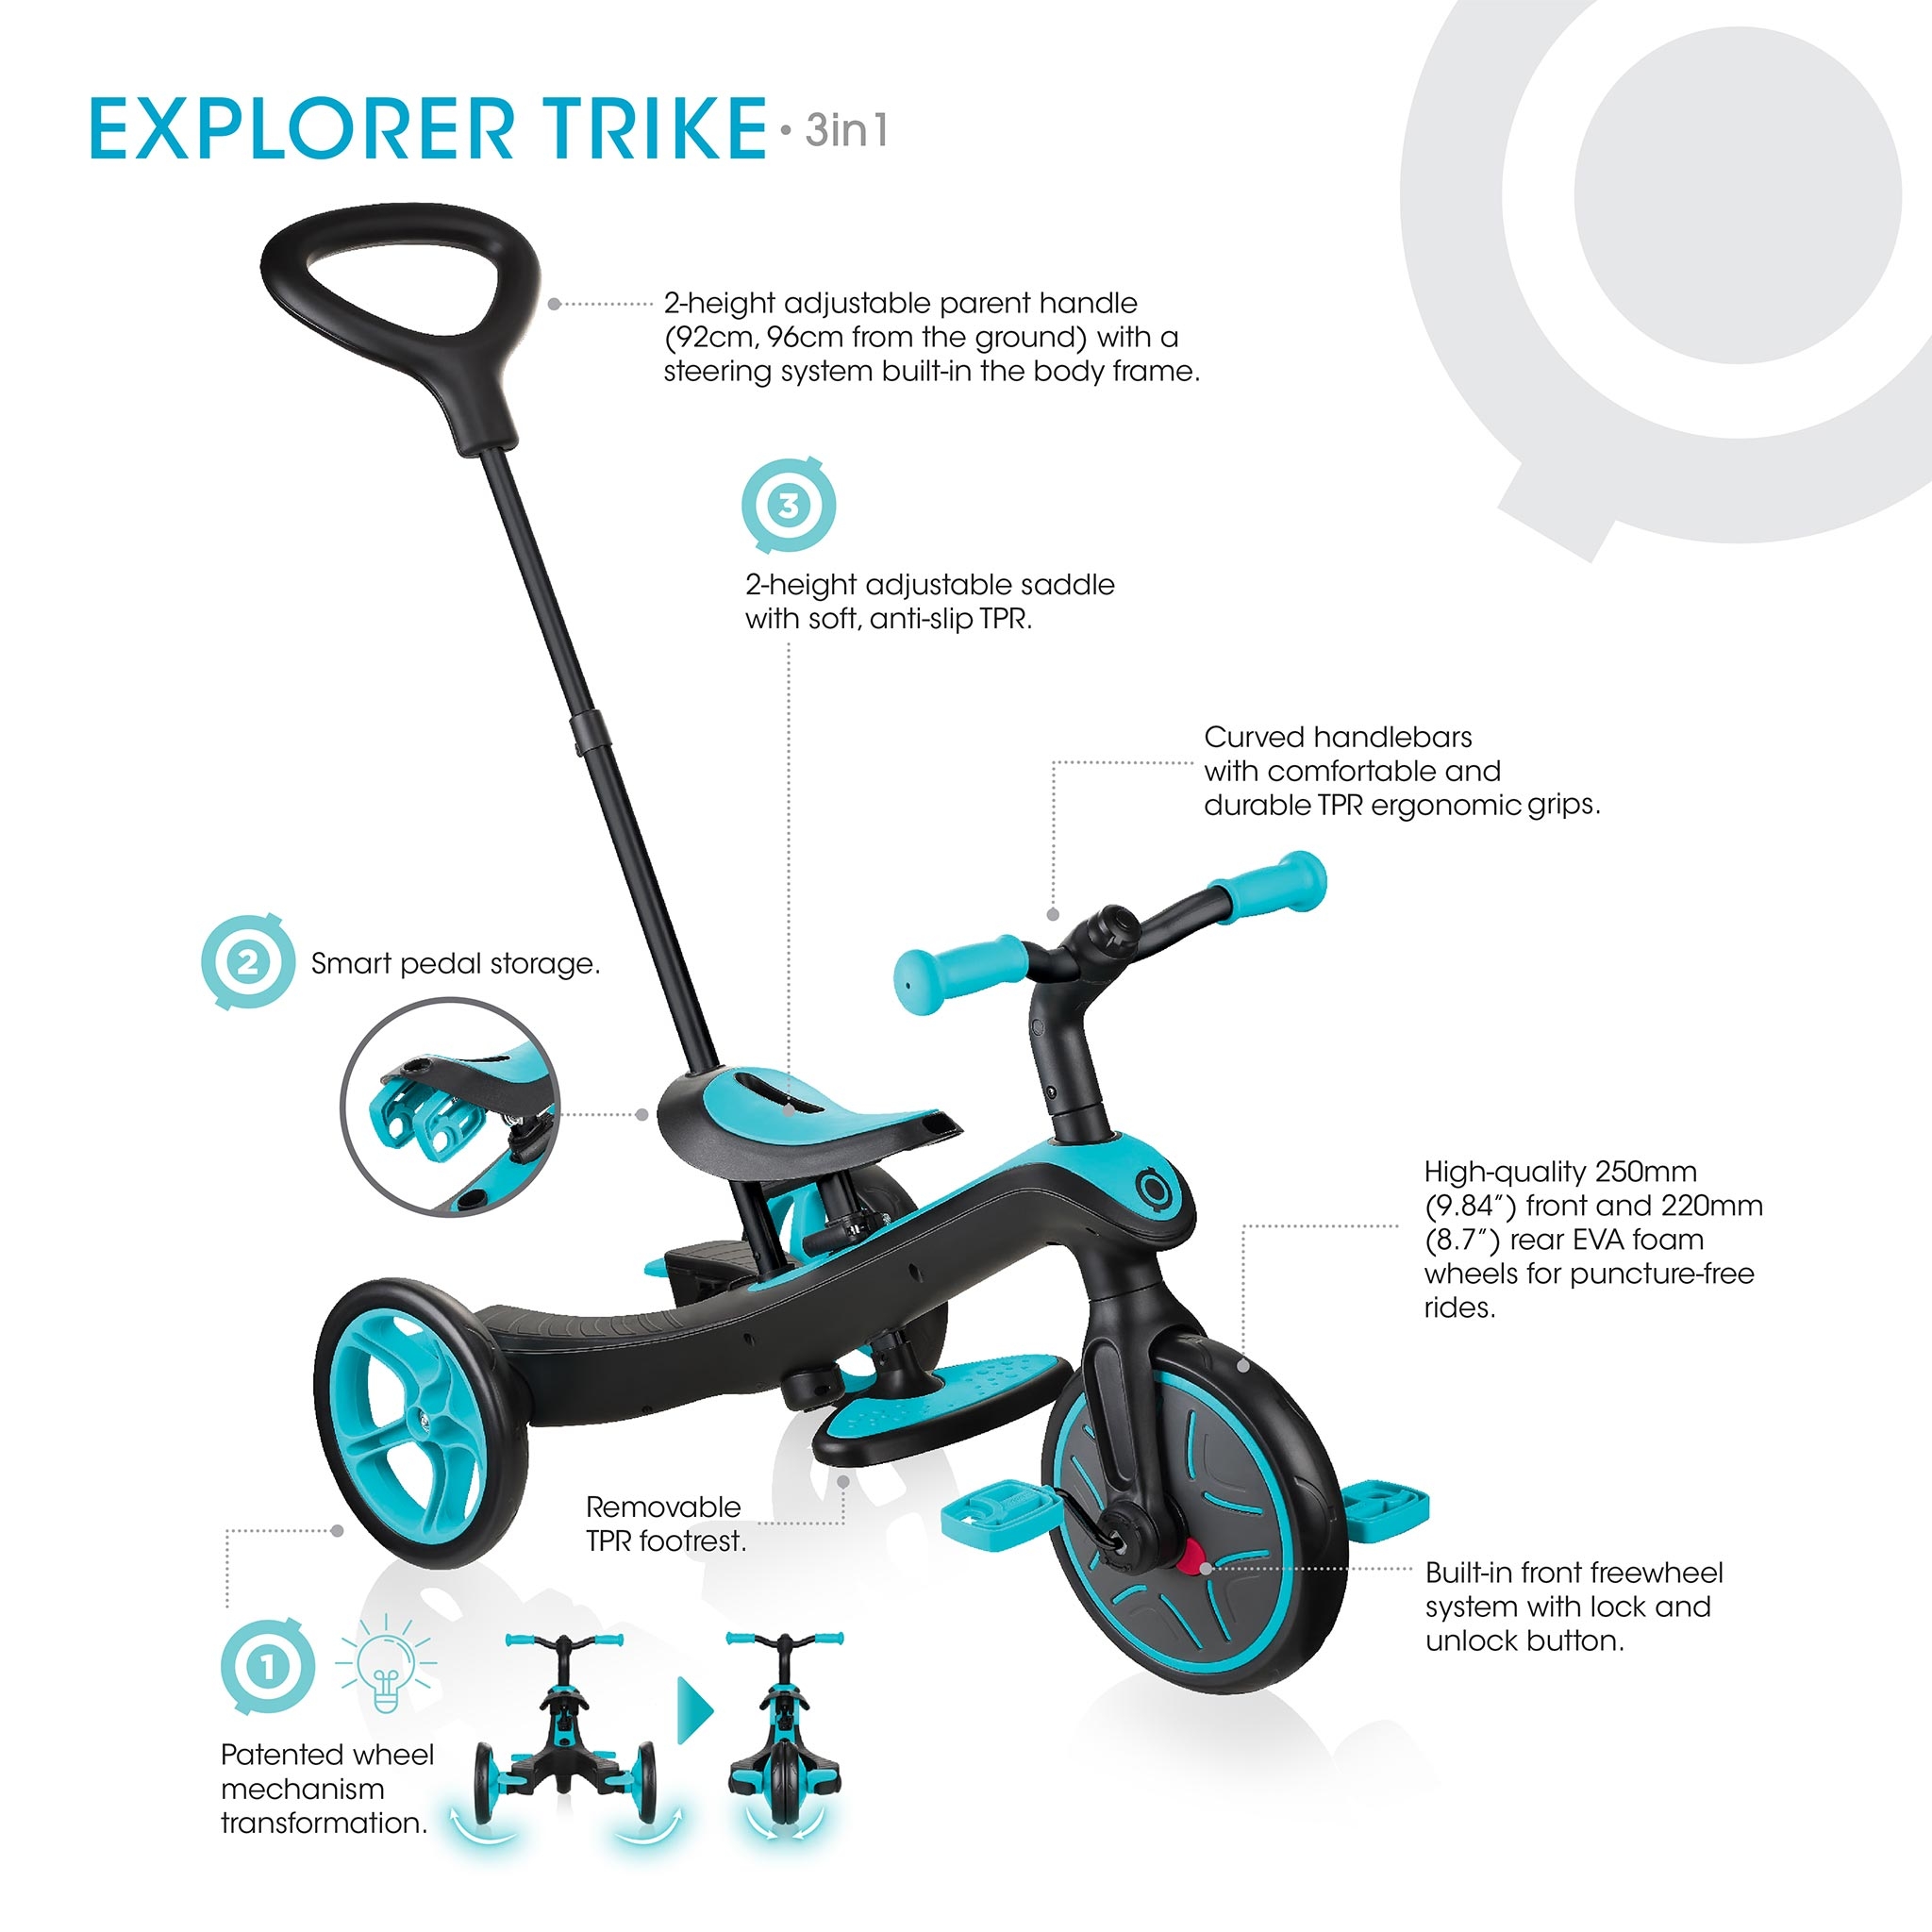 All-in-one baby tricycle for toddlers aged 18 months+ - Globber EXPLORER TRIKE 3in1 3